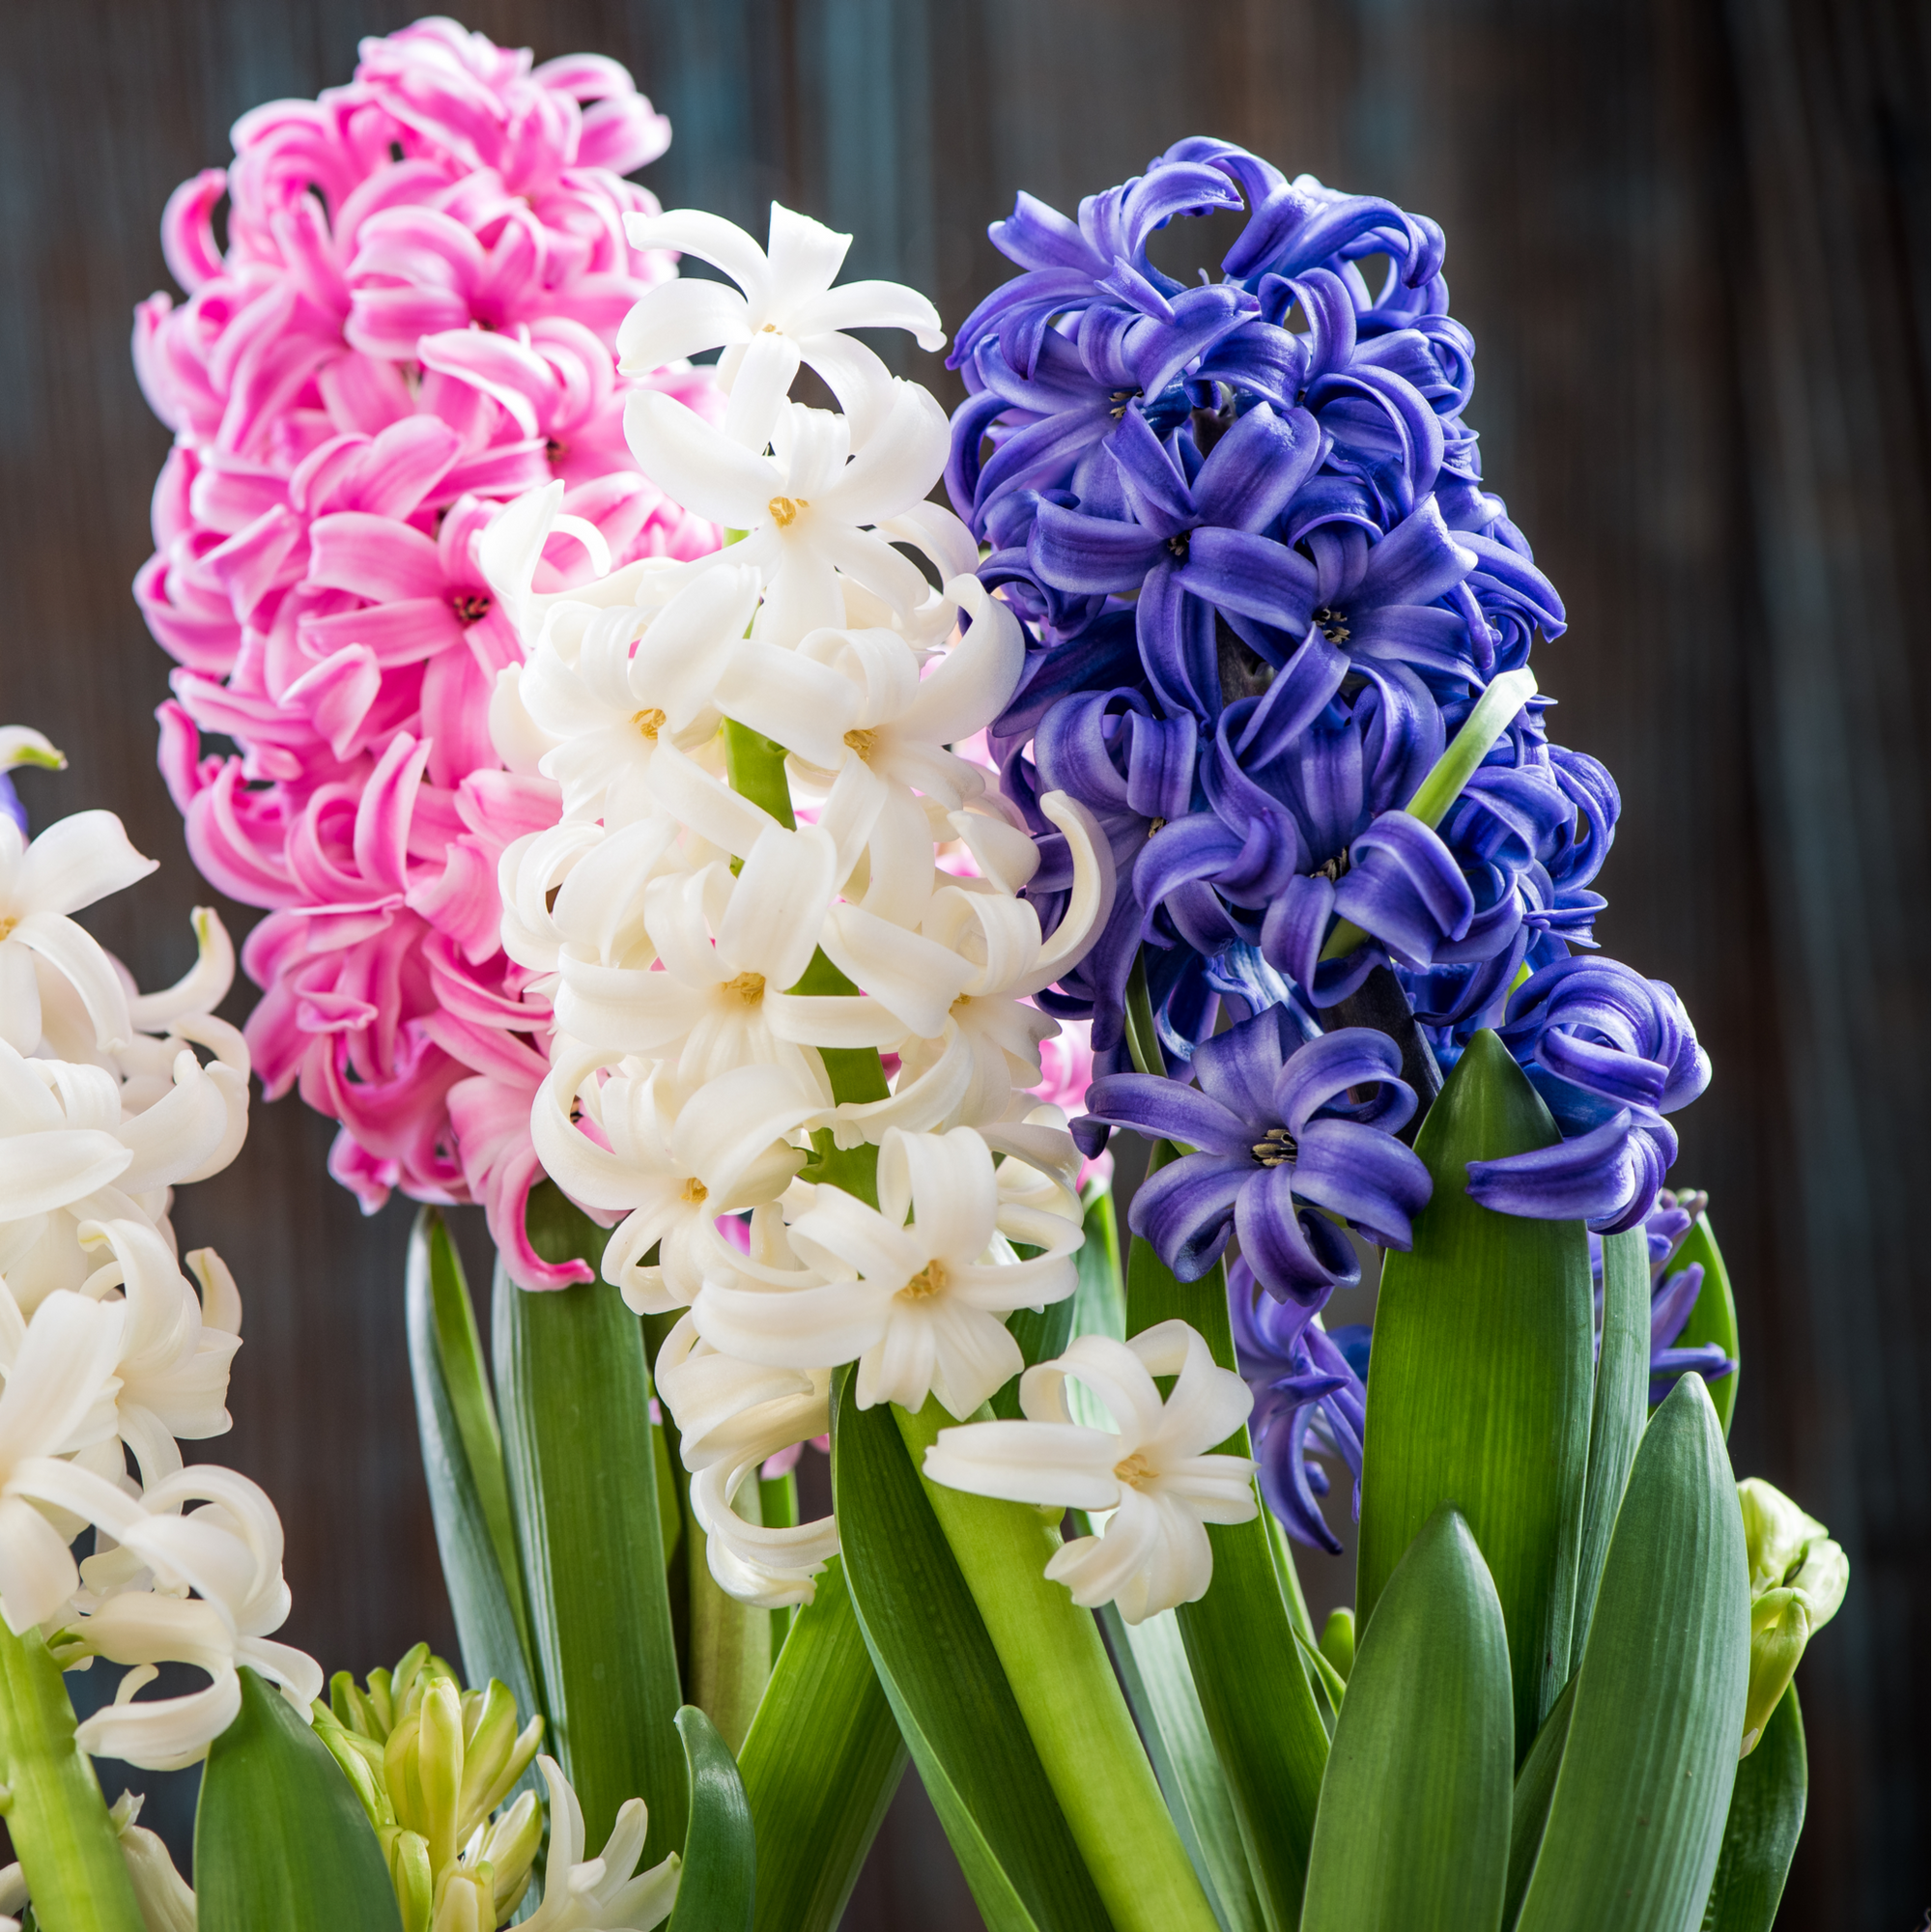 3 x Hyacinths (3 Colours in one pot)